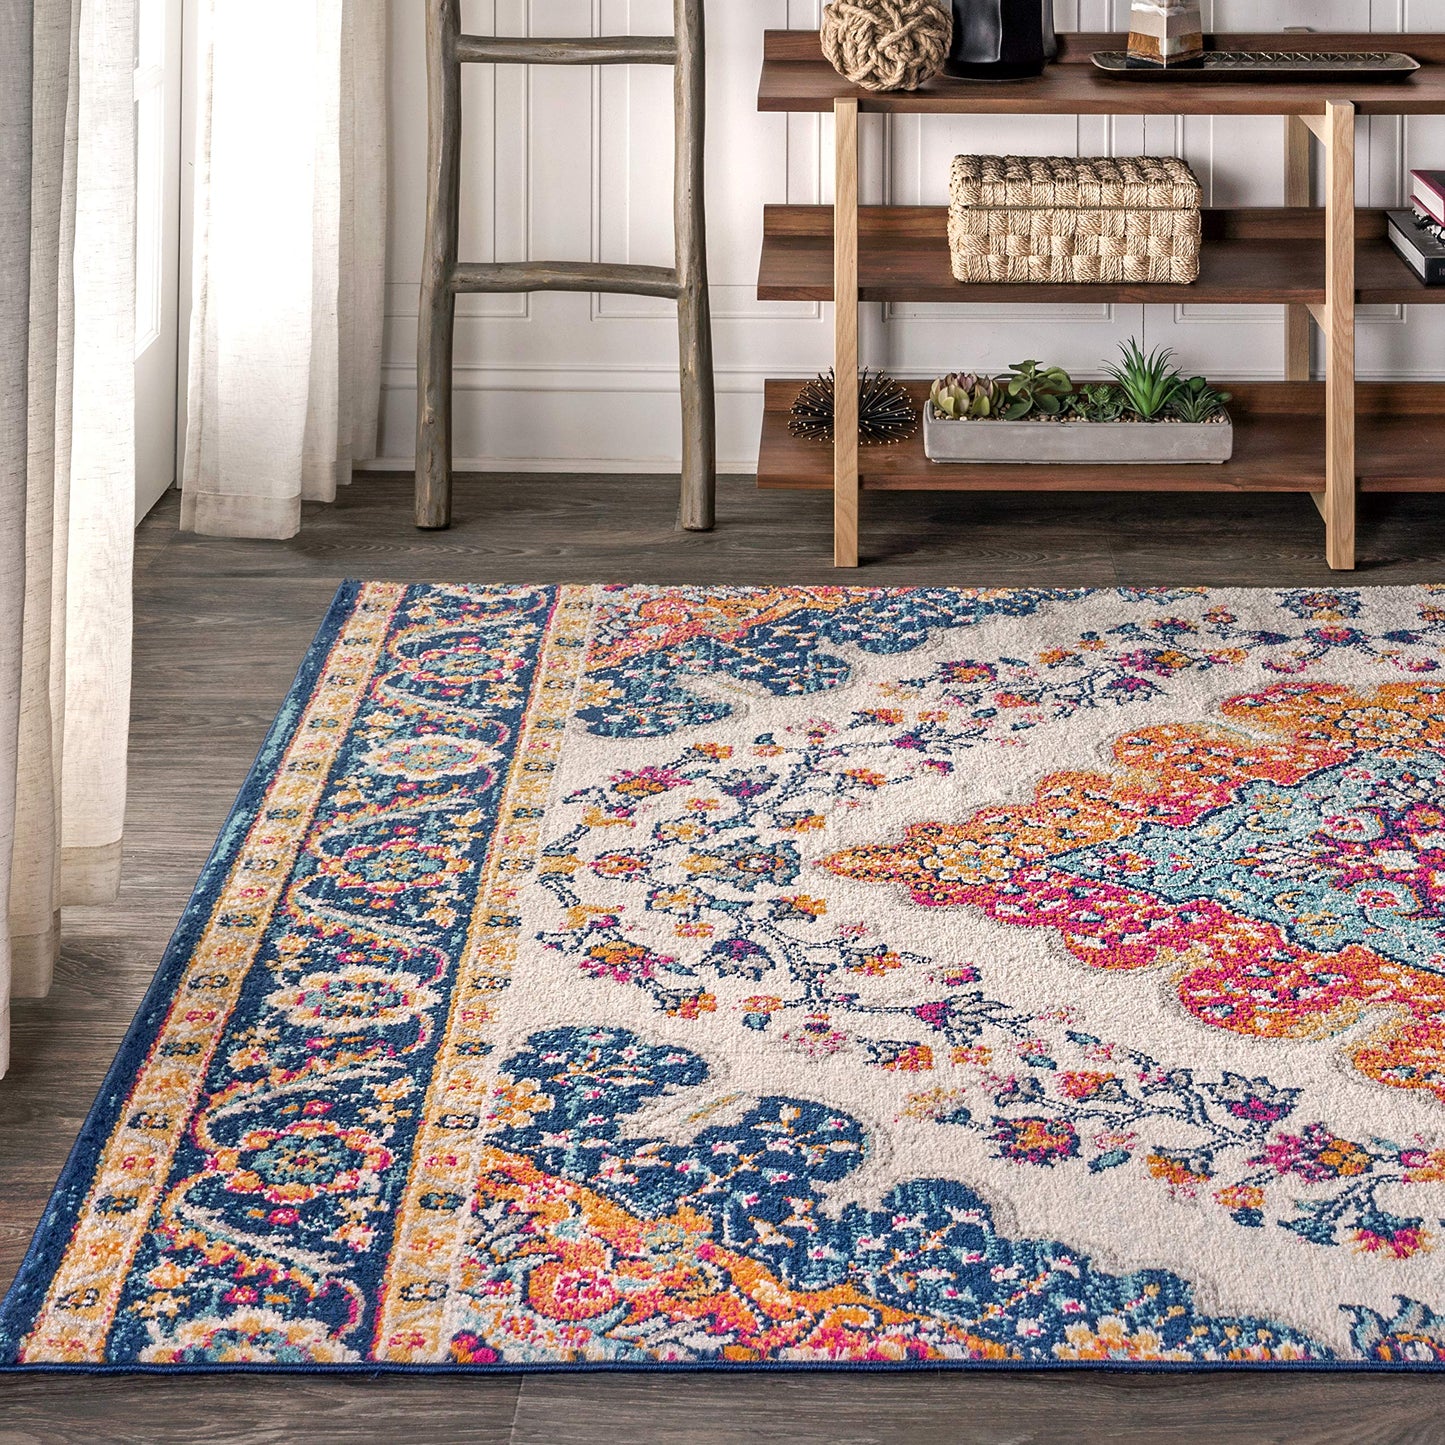 JONATHAN Y BMF106A-8 Bohemian Flair Boho Vintage Medallion Blue/Multi 8 ft. x 10 ft. Area-Rug, Vintage, Easy-Cleaning, for Bedroom, Kitchen, Living Room, Non Shedding